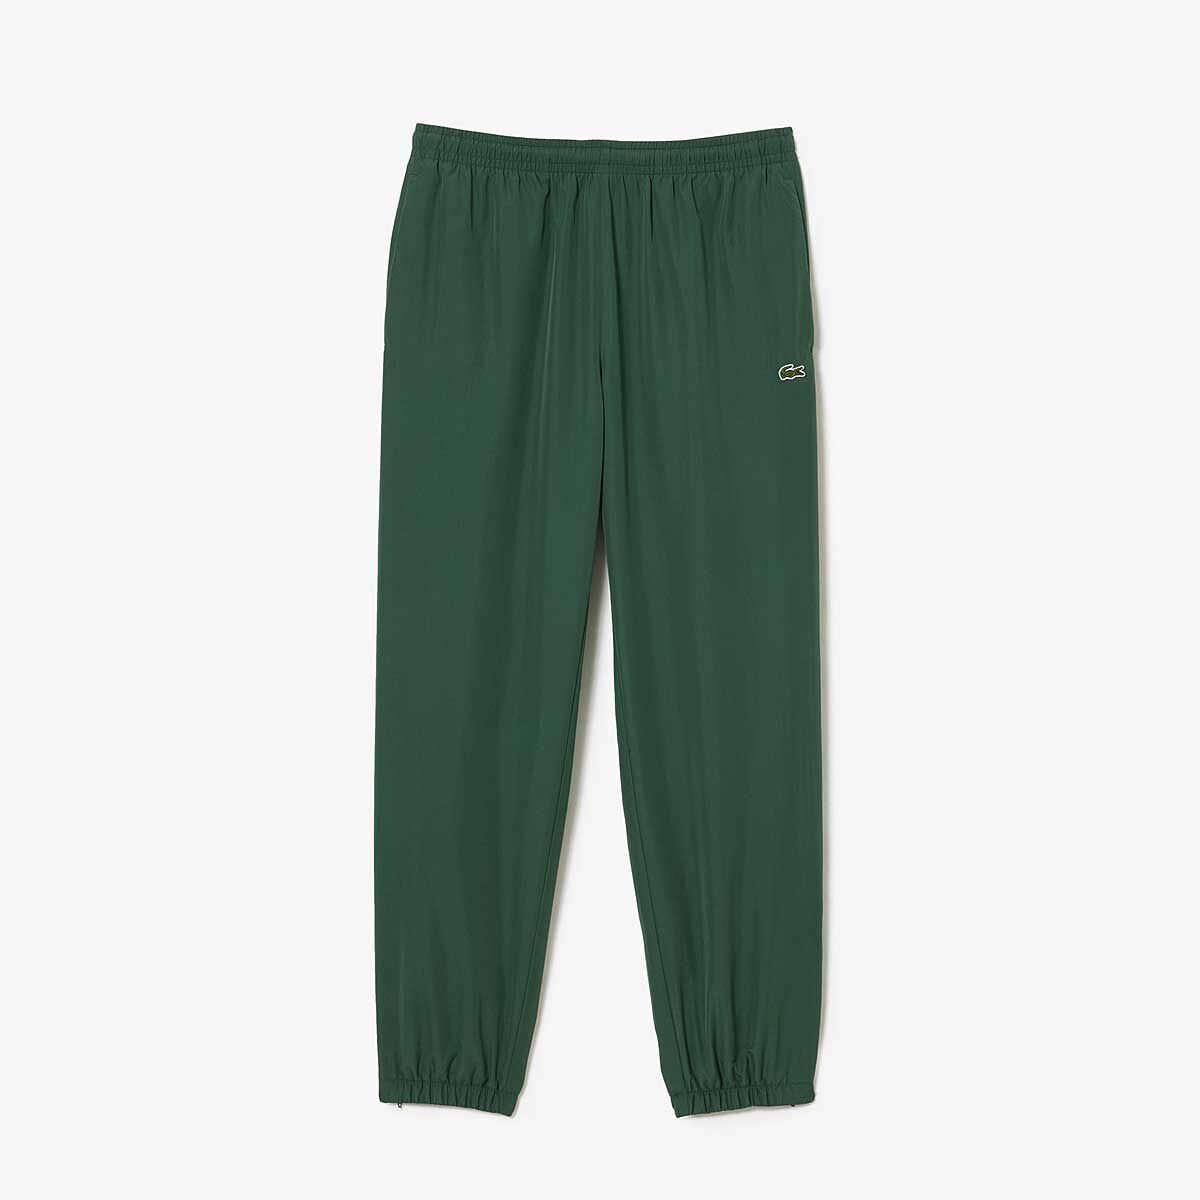 Lacoste Mens Ombre Checkerboard Print Track Pants